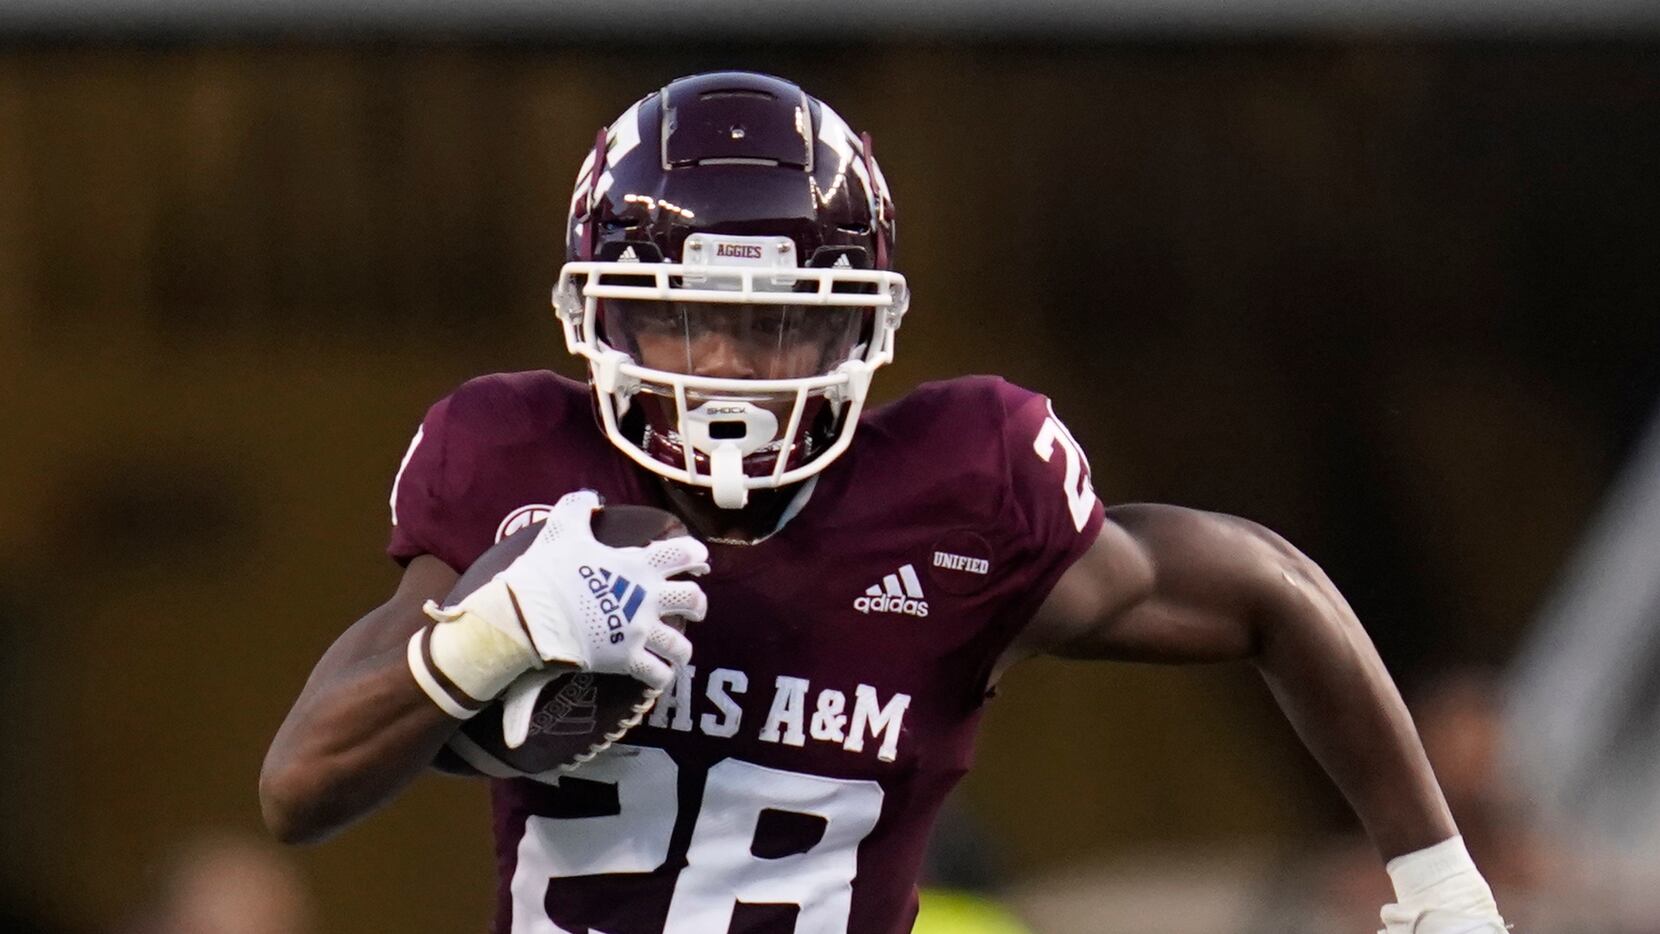 Texas A&M Football: Top 3 prospects for 2022 NFL draft